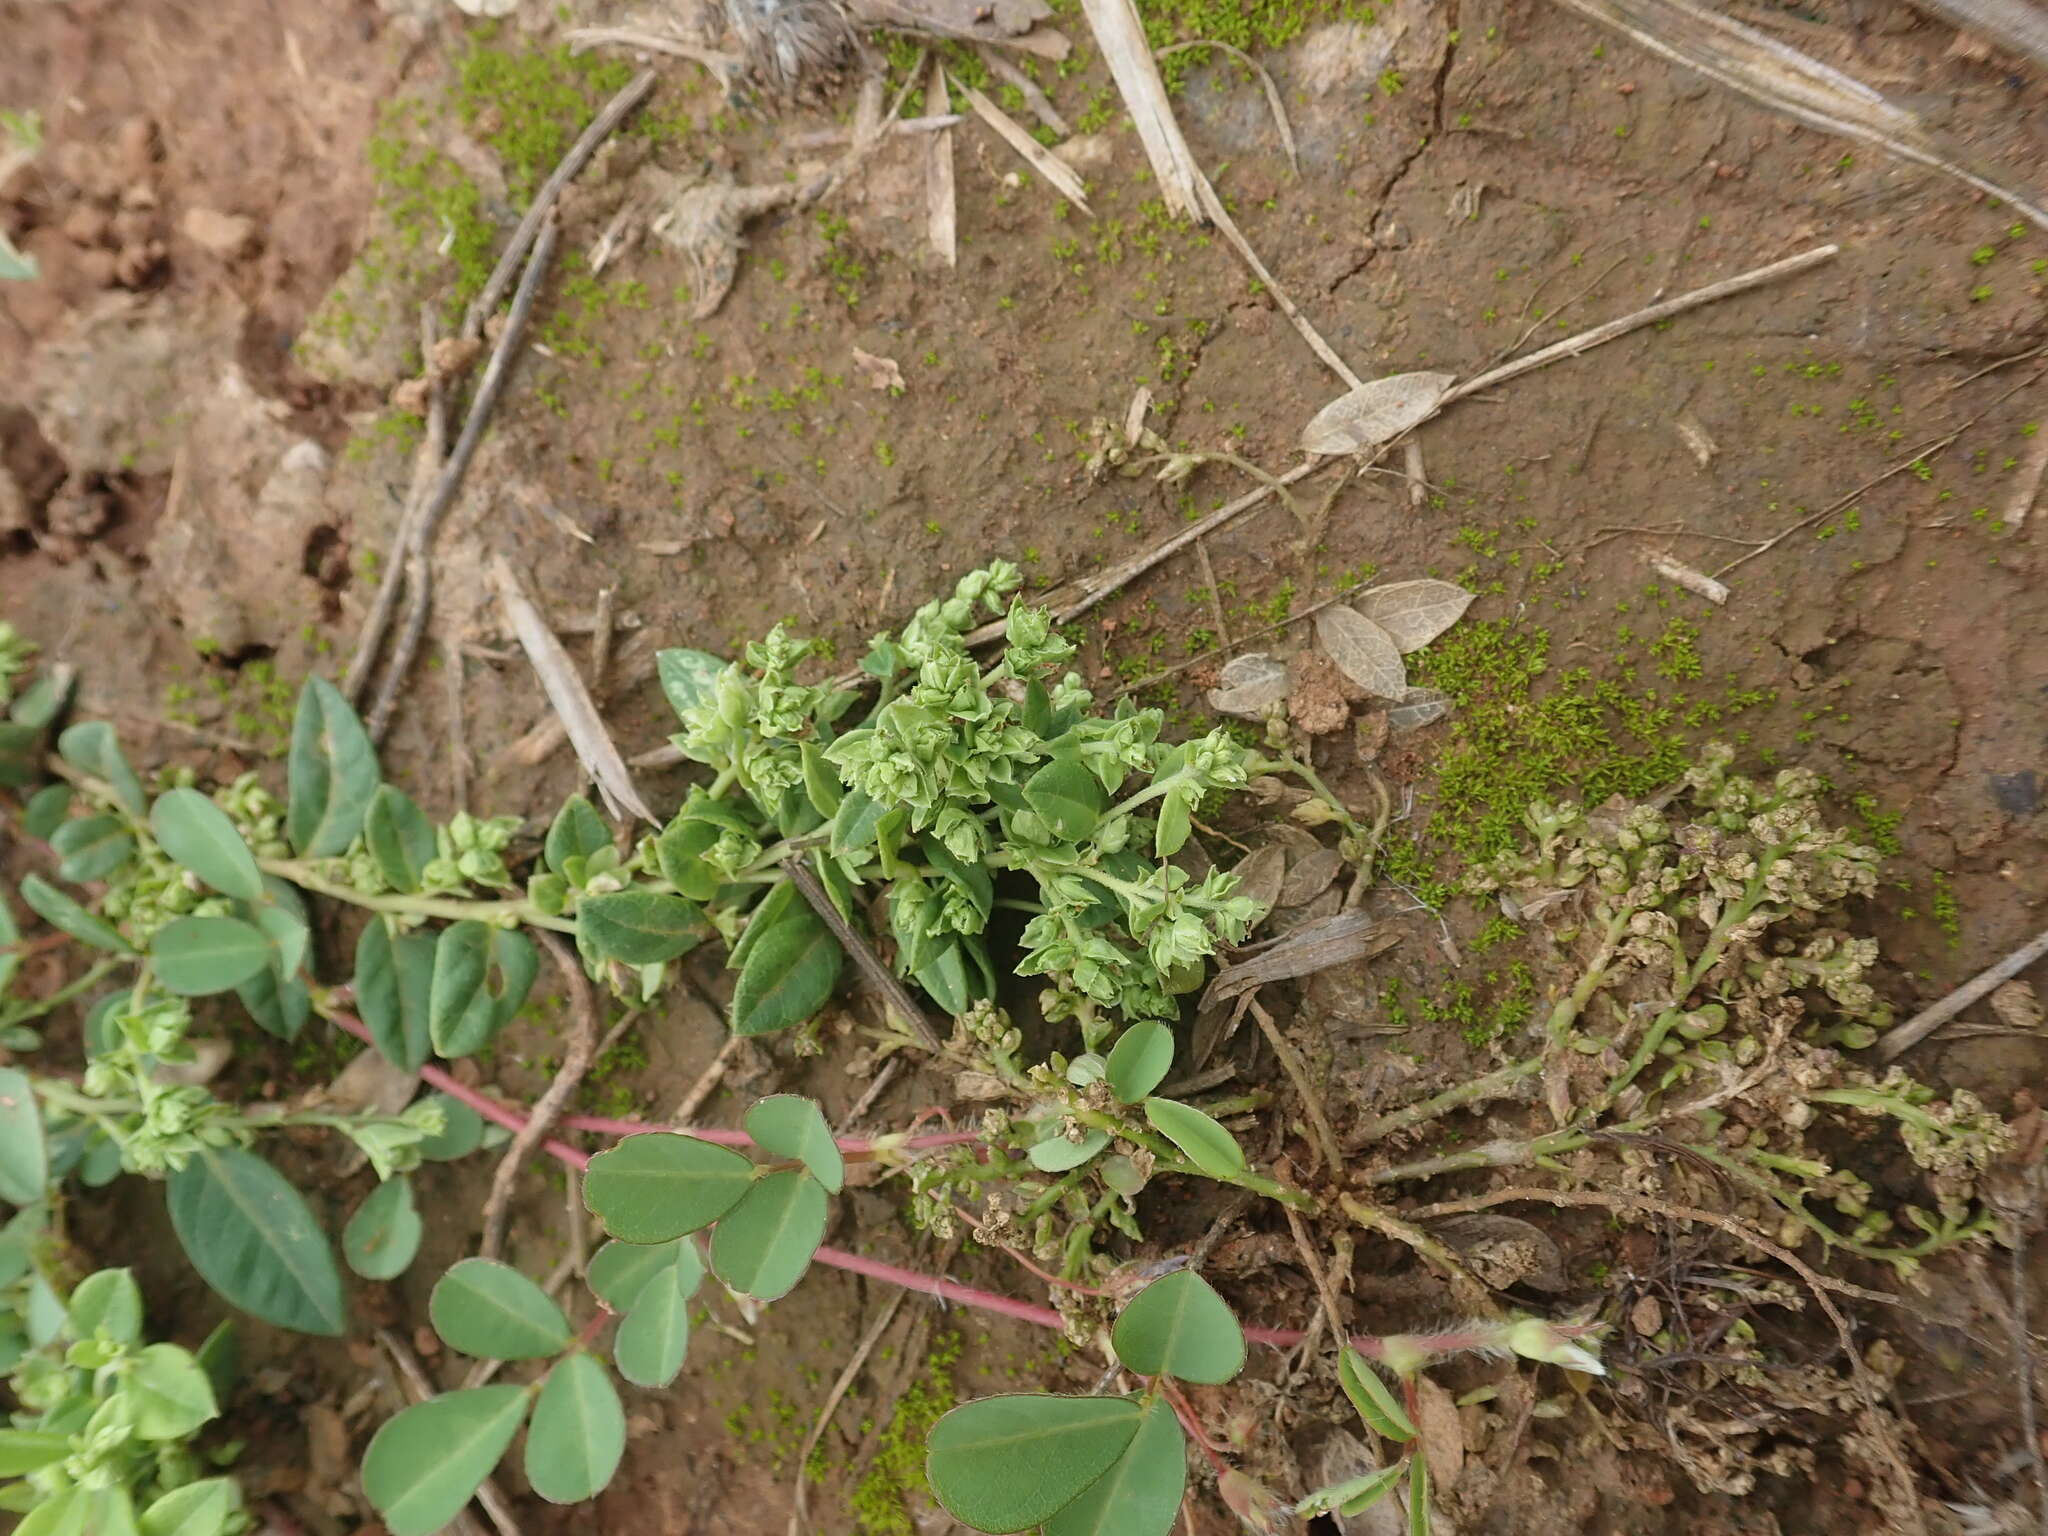 Image of Polygala arvensis Willd.